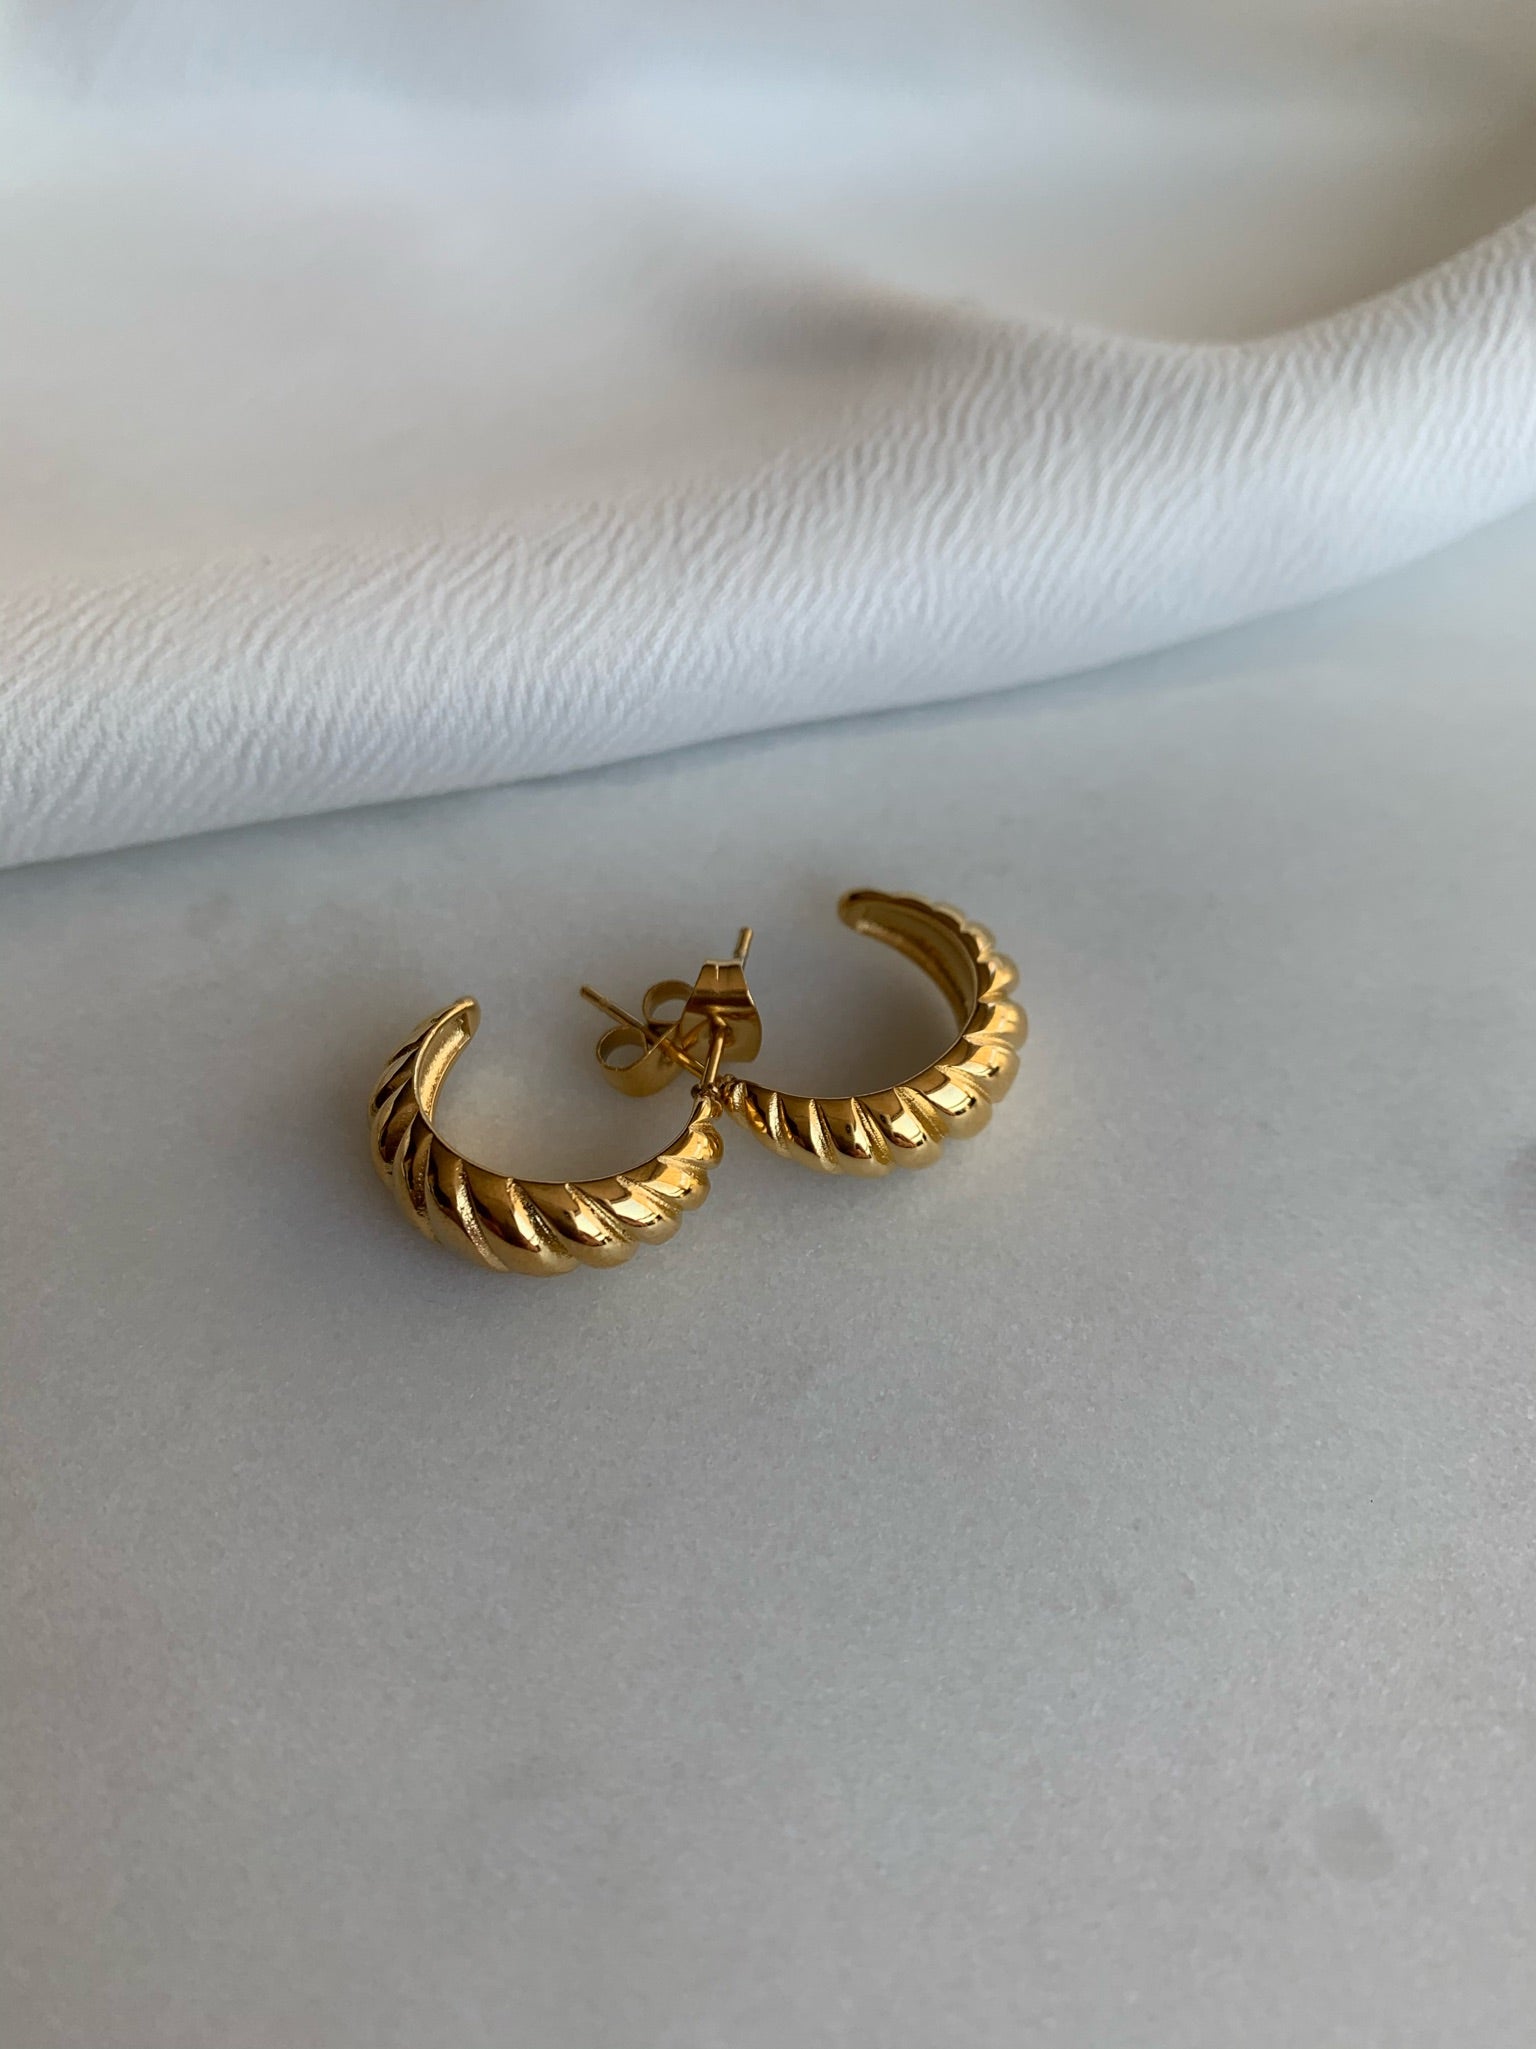 Cute croissant style earrings to match your ring & add to your ear stack! 14 Karat Gold Plated Hypoallergenic Tarnish Resistant 15mm hoops | Easy Croissant Earrings | Handmade Jewelry EasyClubCo